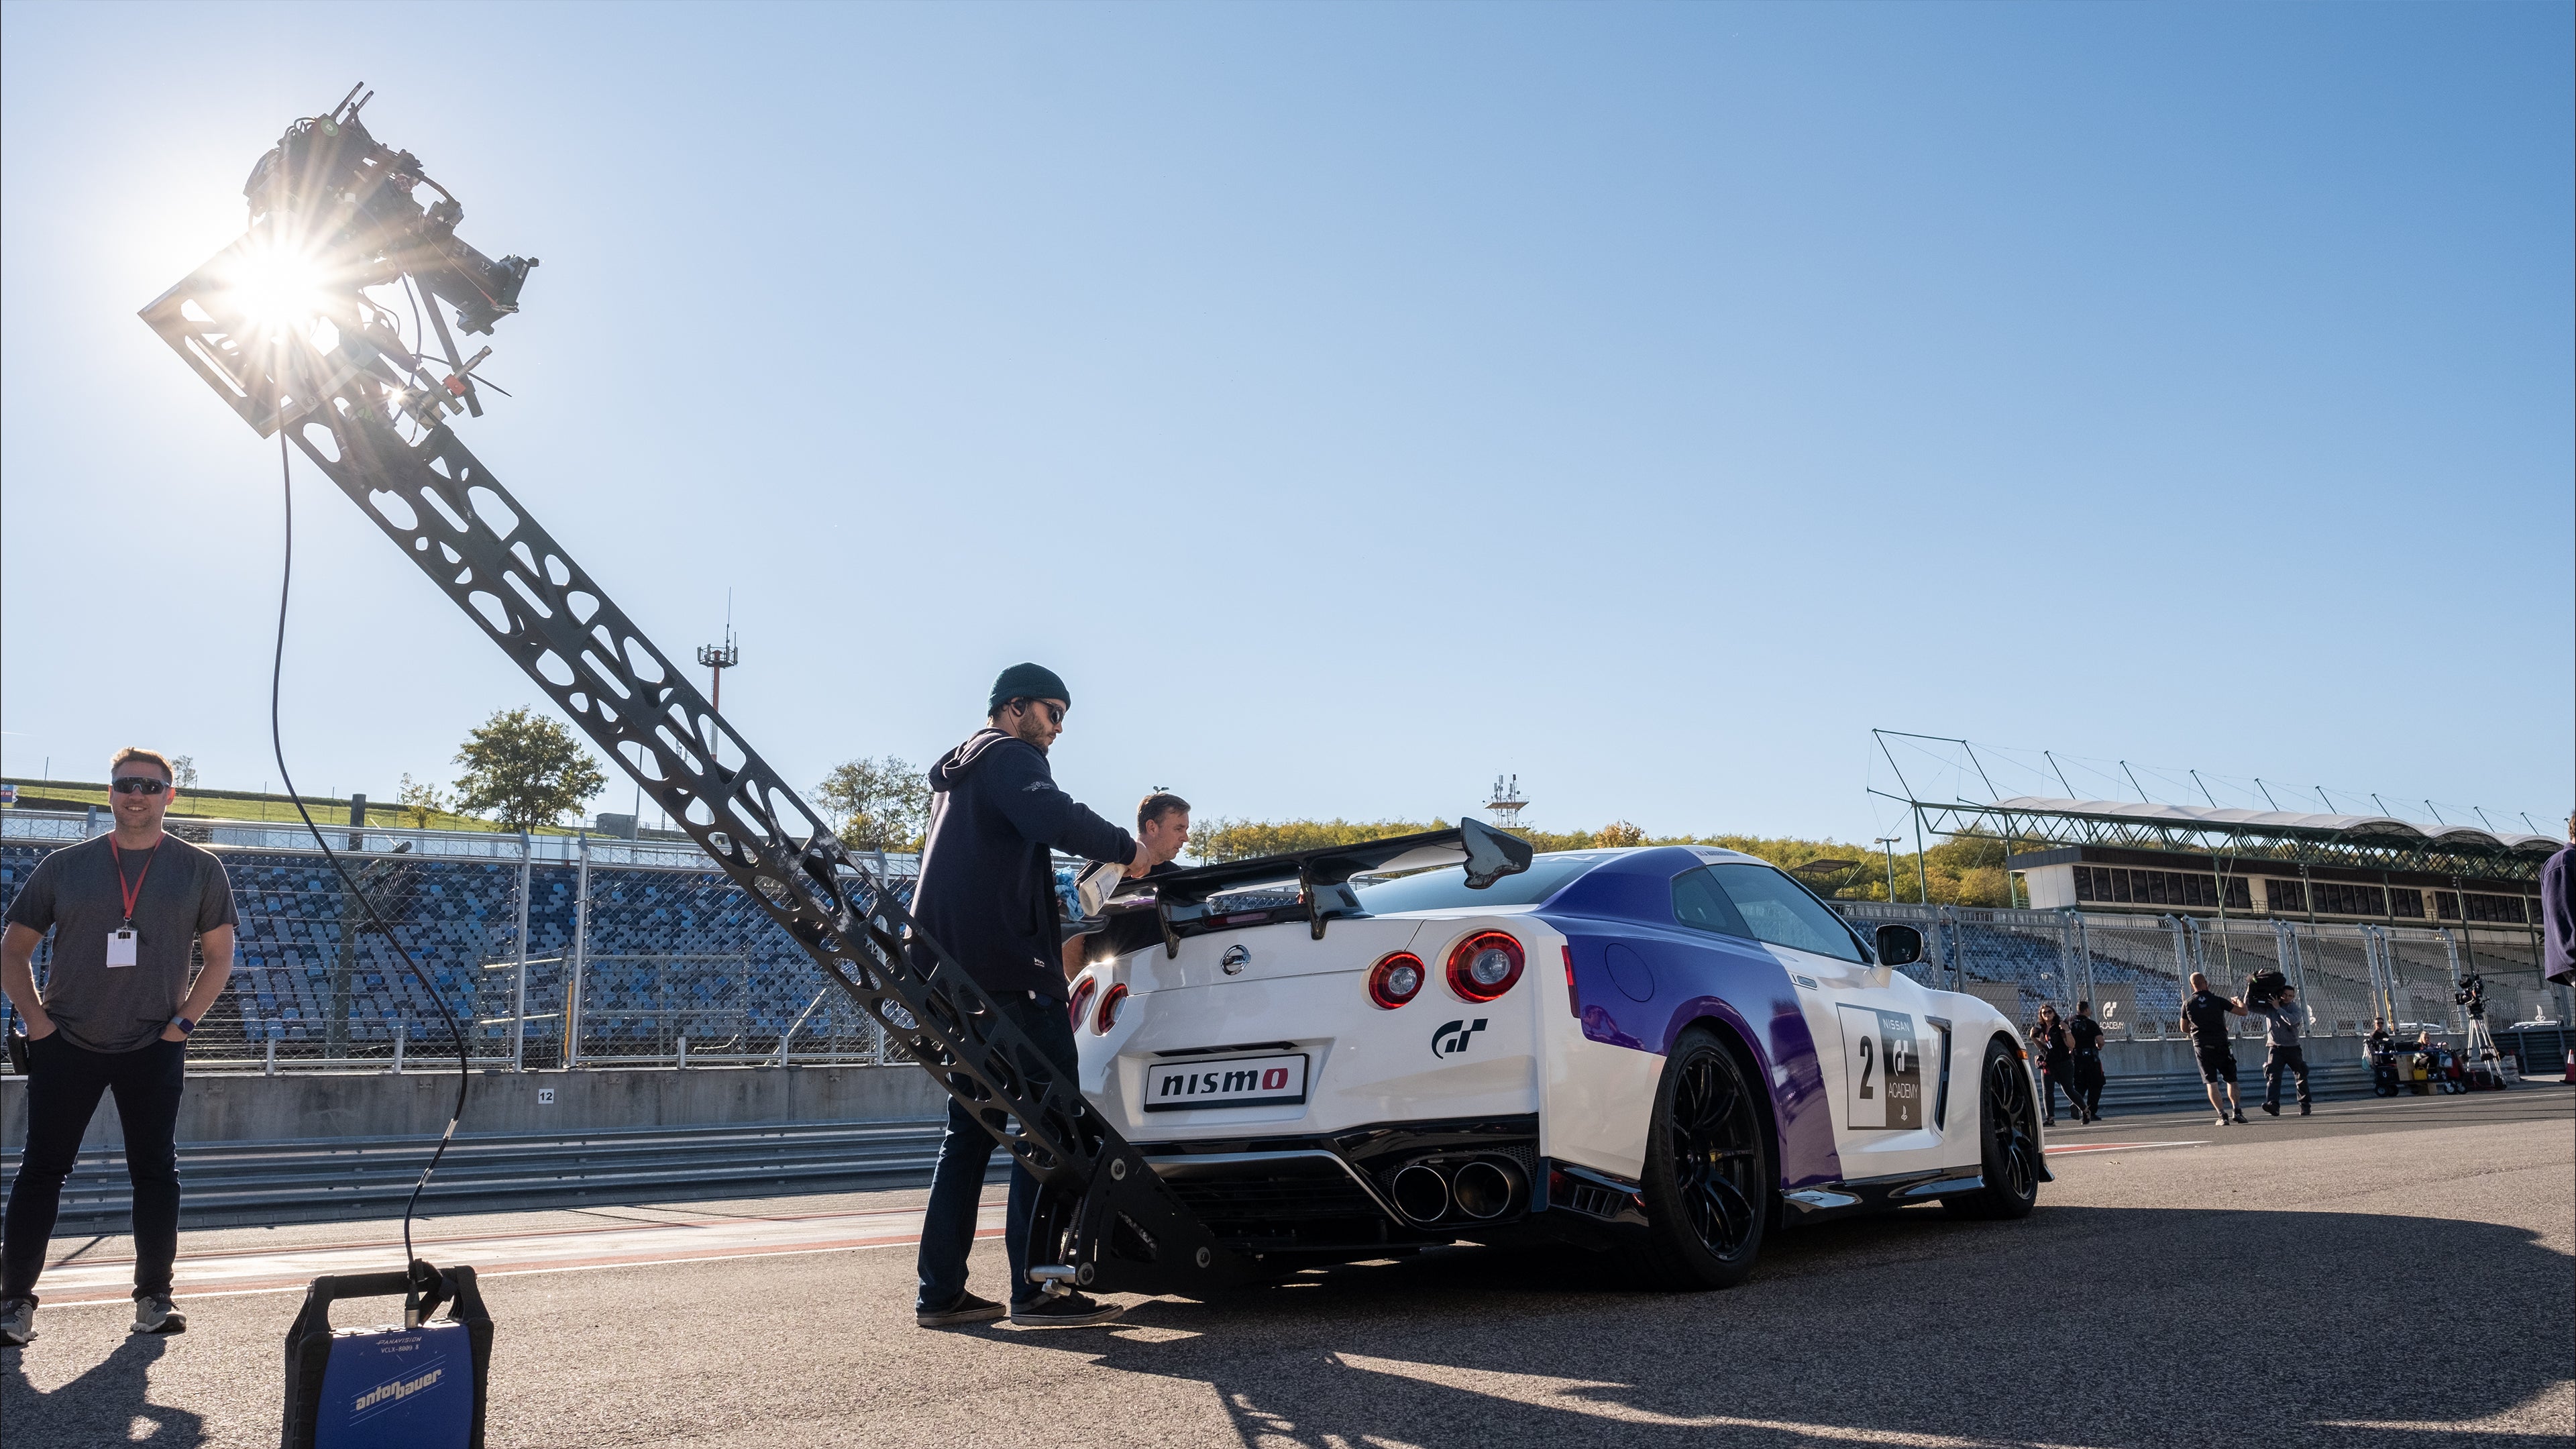 Gran Turismo movie confirms filming has started with new set photo